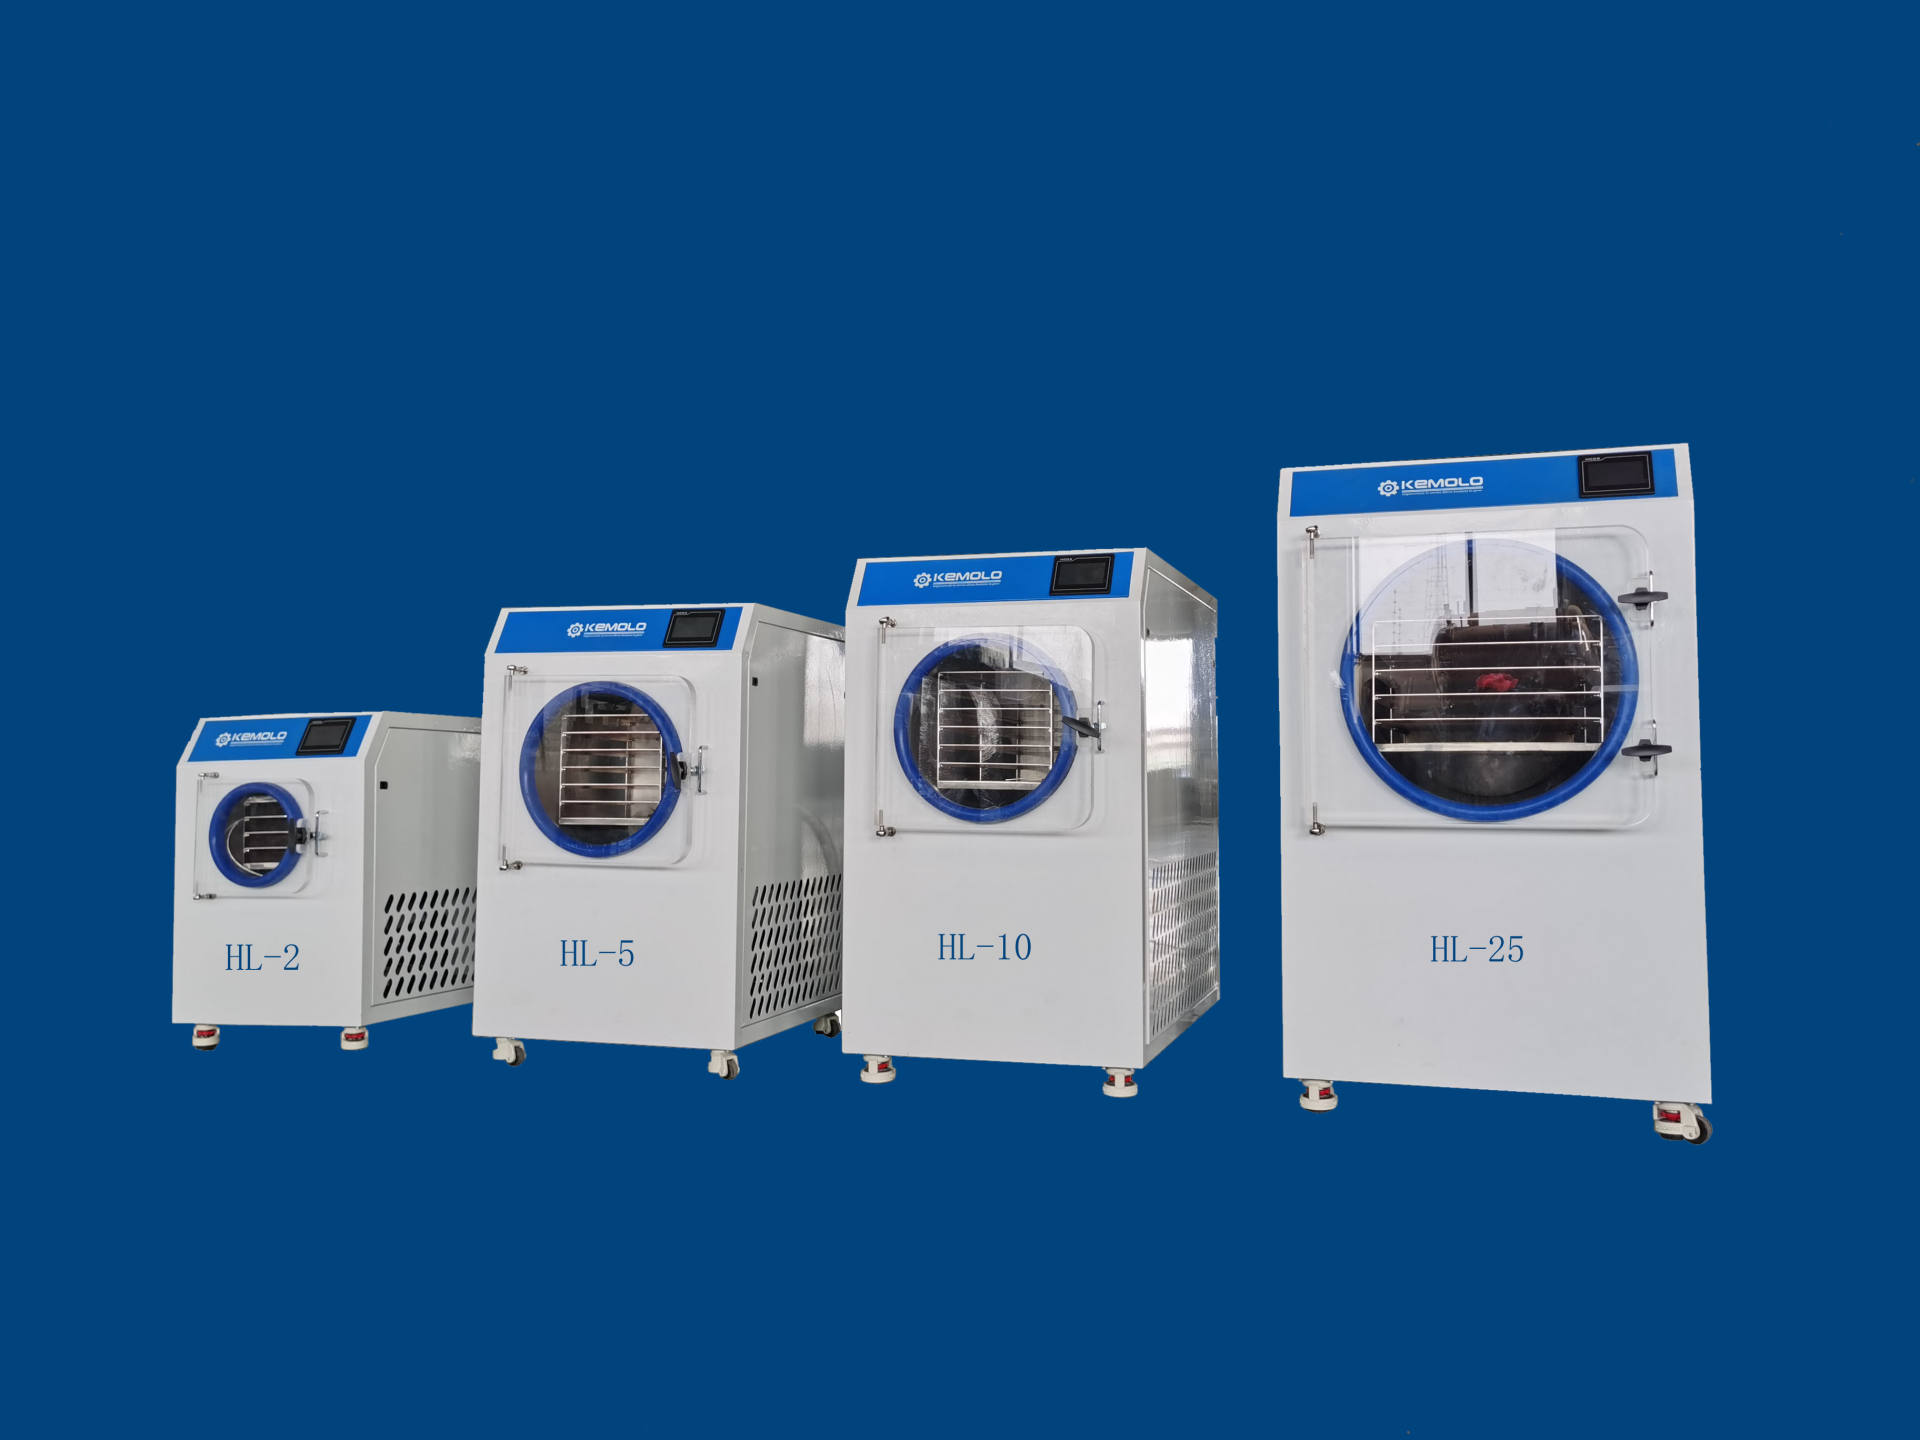 Small Freeze Dryers for Homes, Labs and Small Businesses